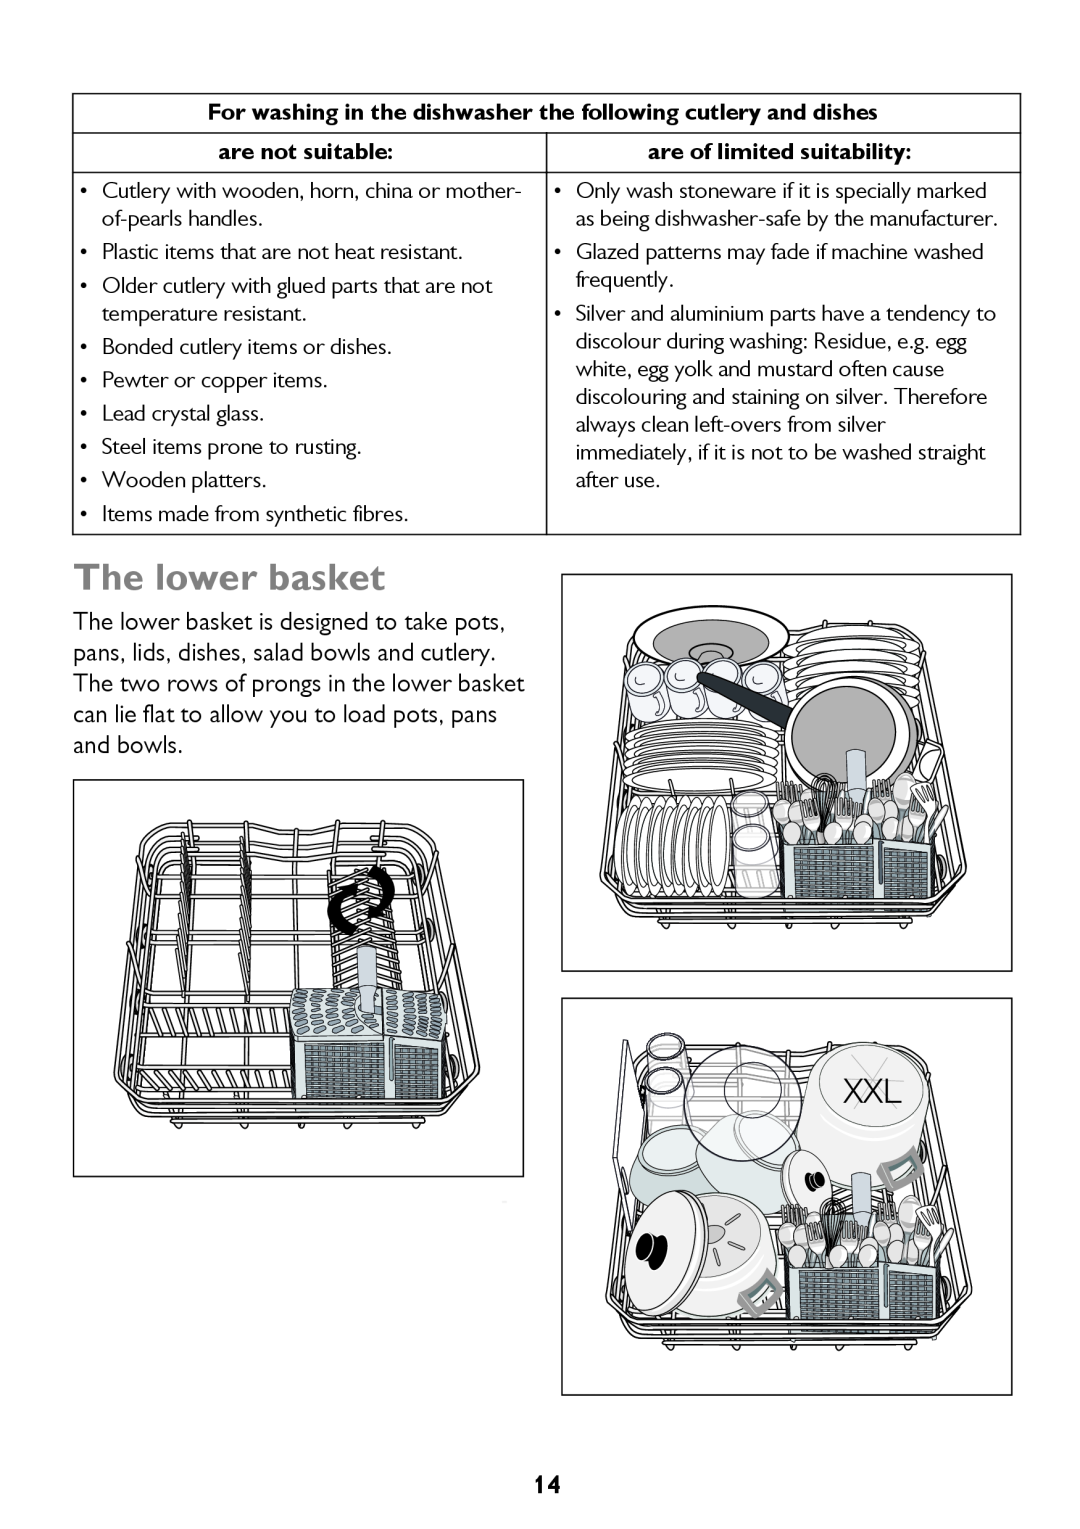 John Lewis JLDW 1221 instruction manual The lower basket, are not suitable, are of limited suitability 